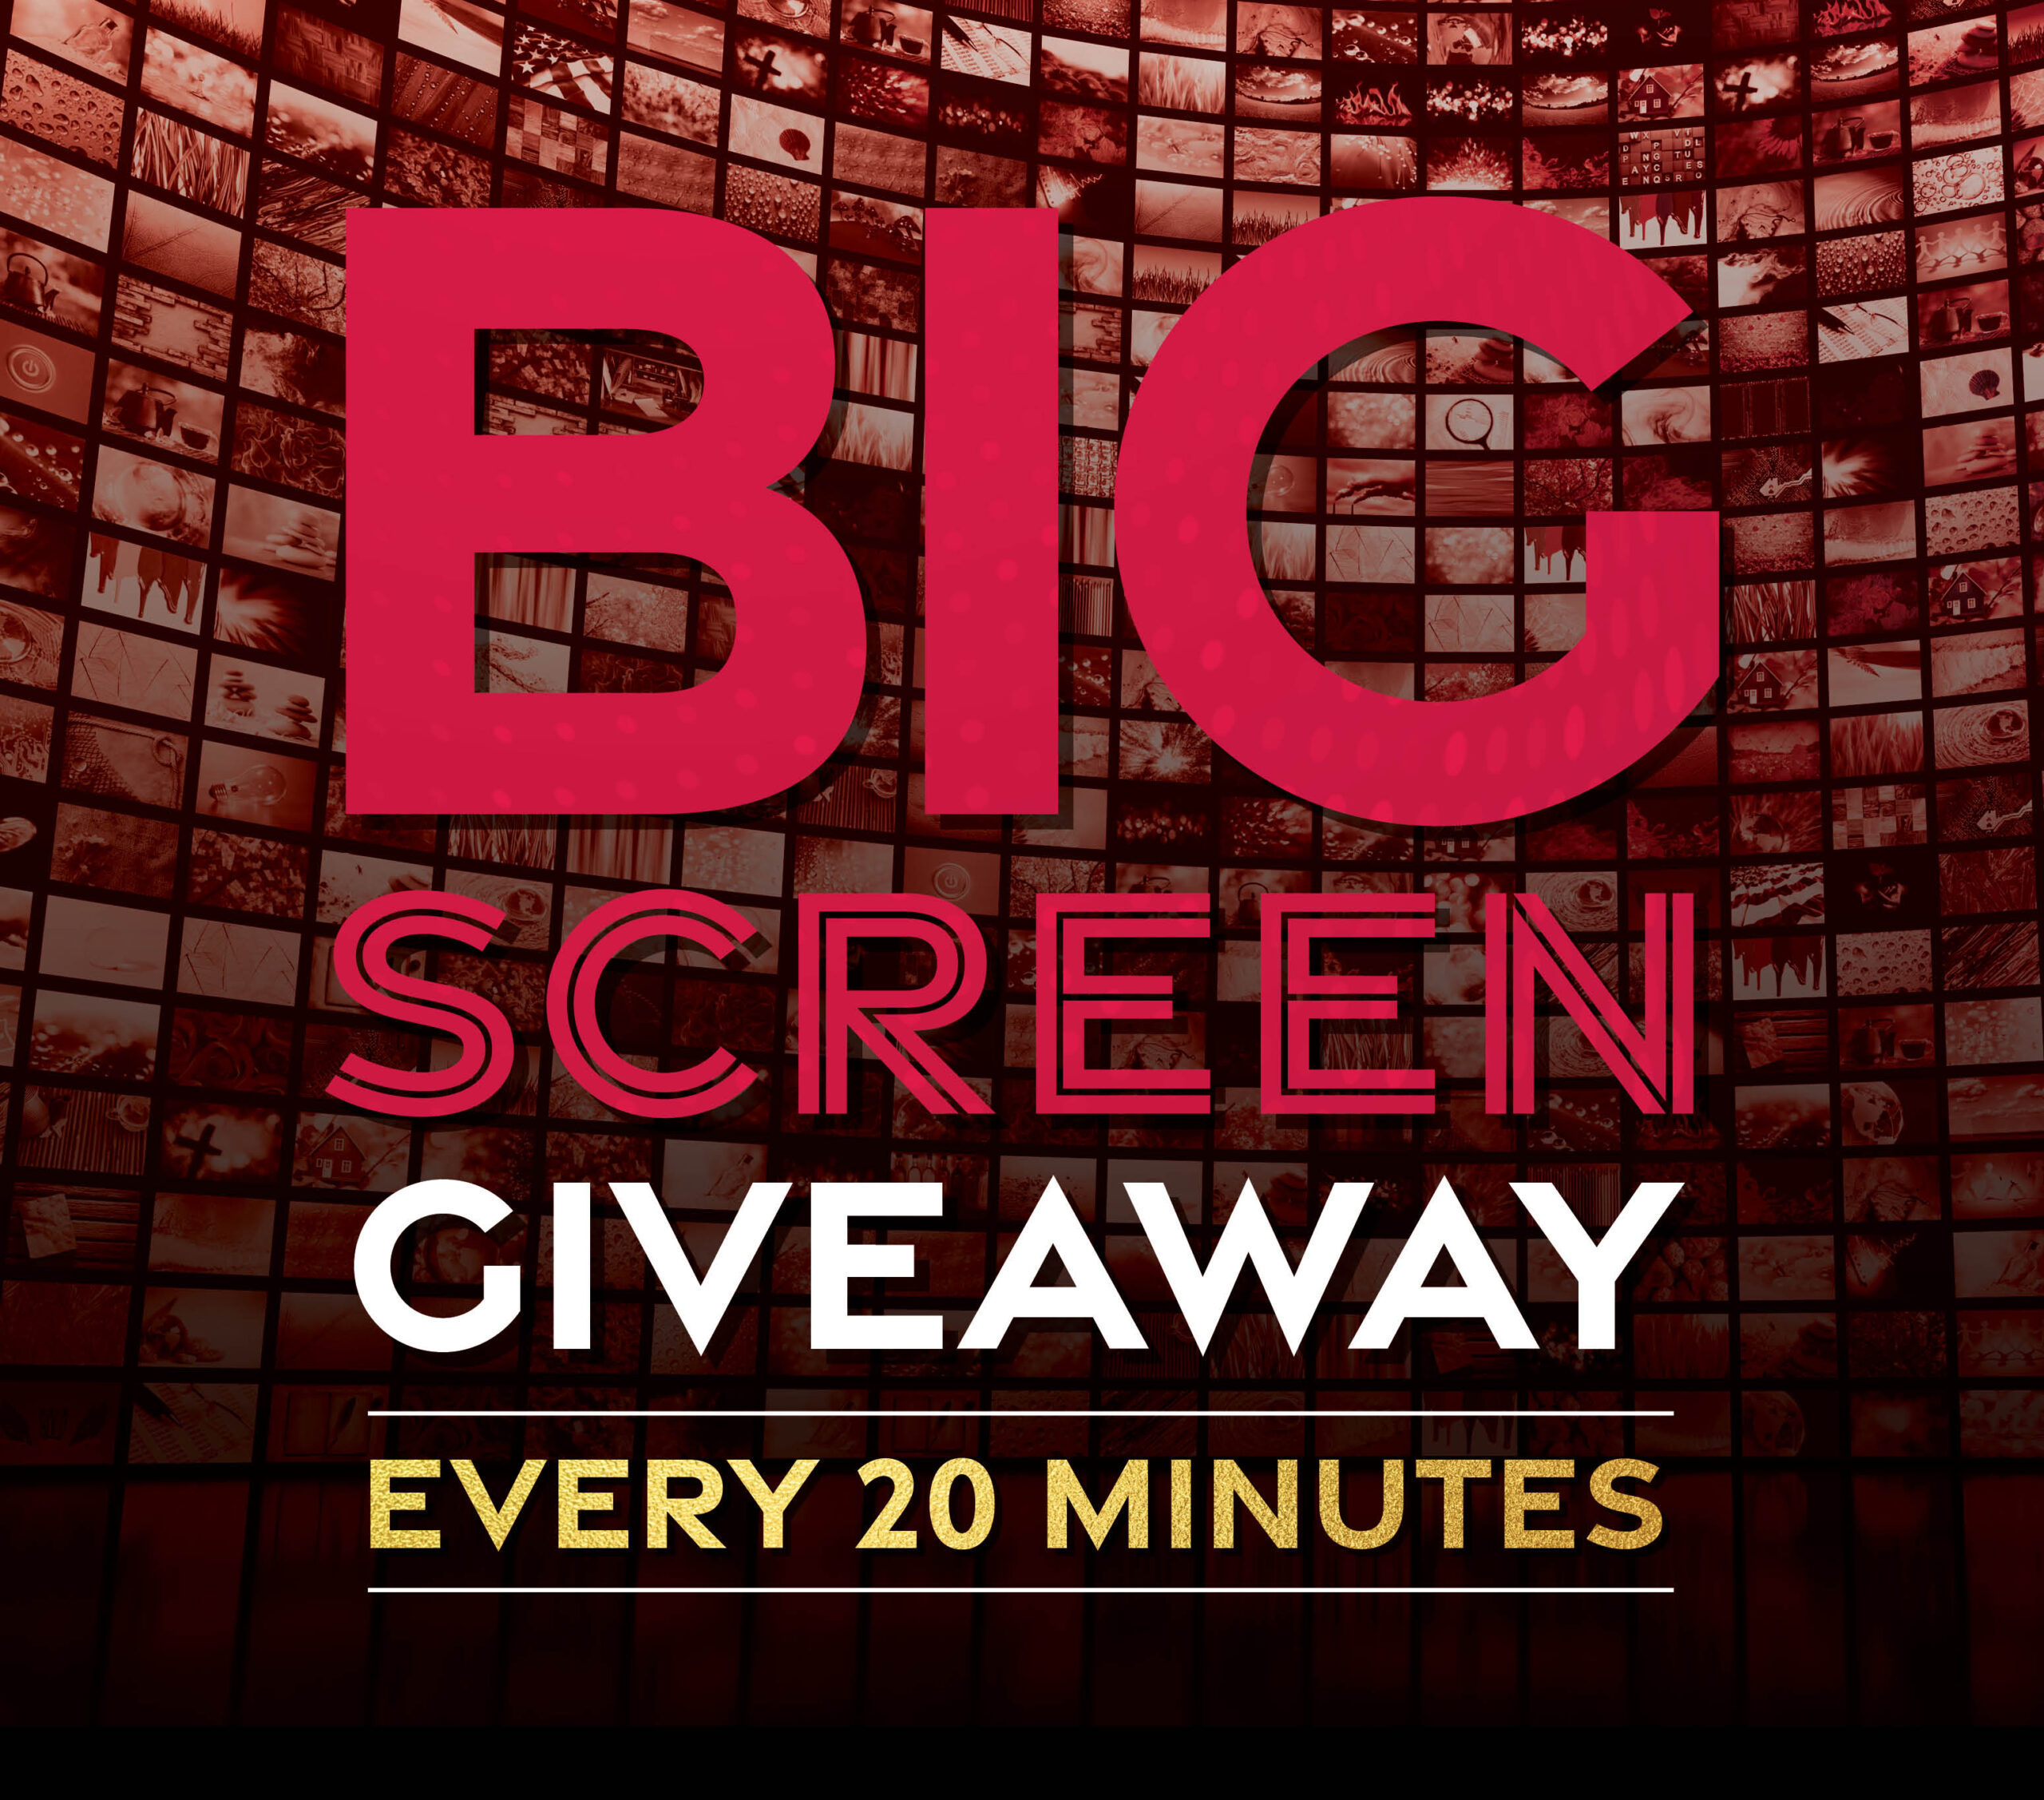 Big Screen Giveaway Every 20 Minutes